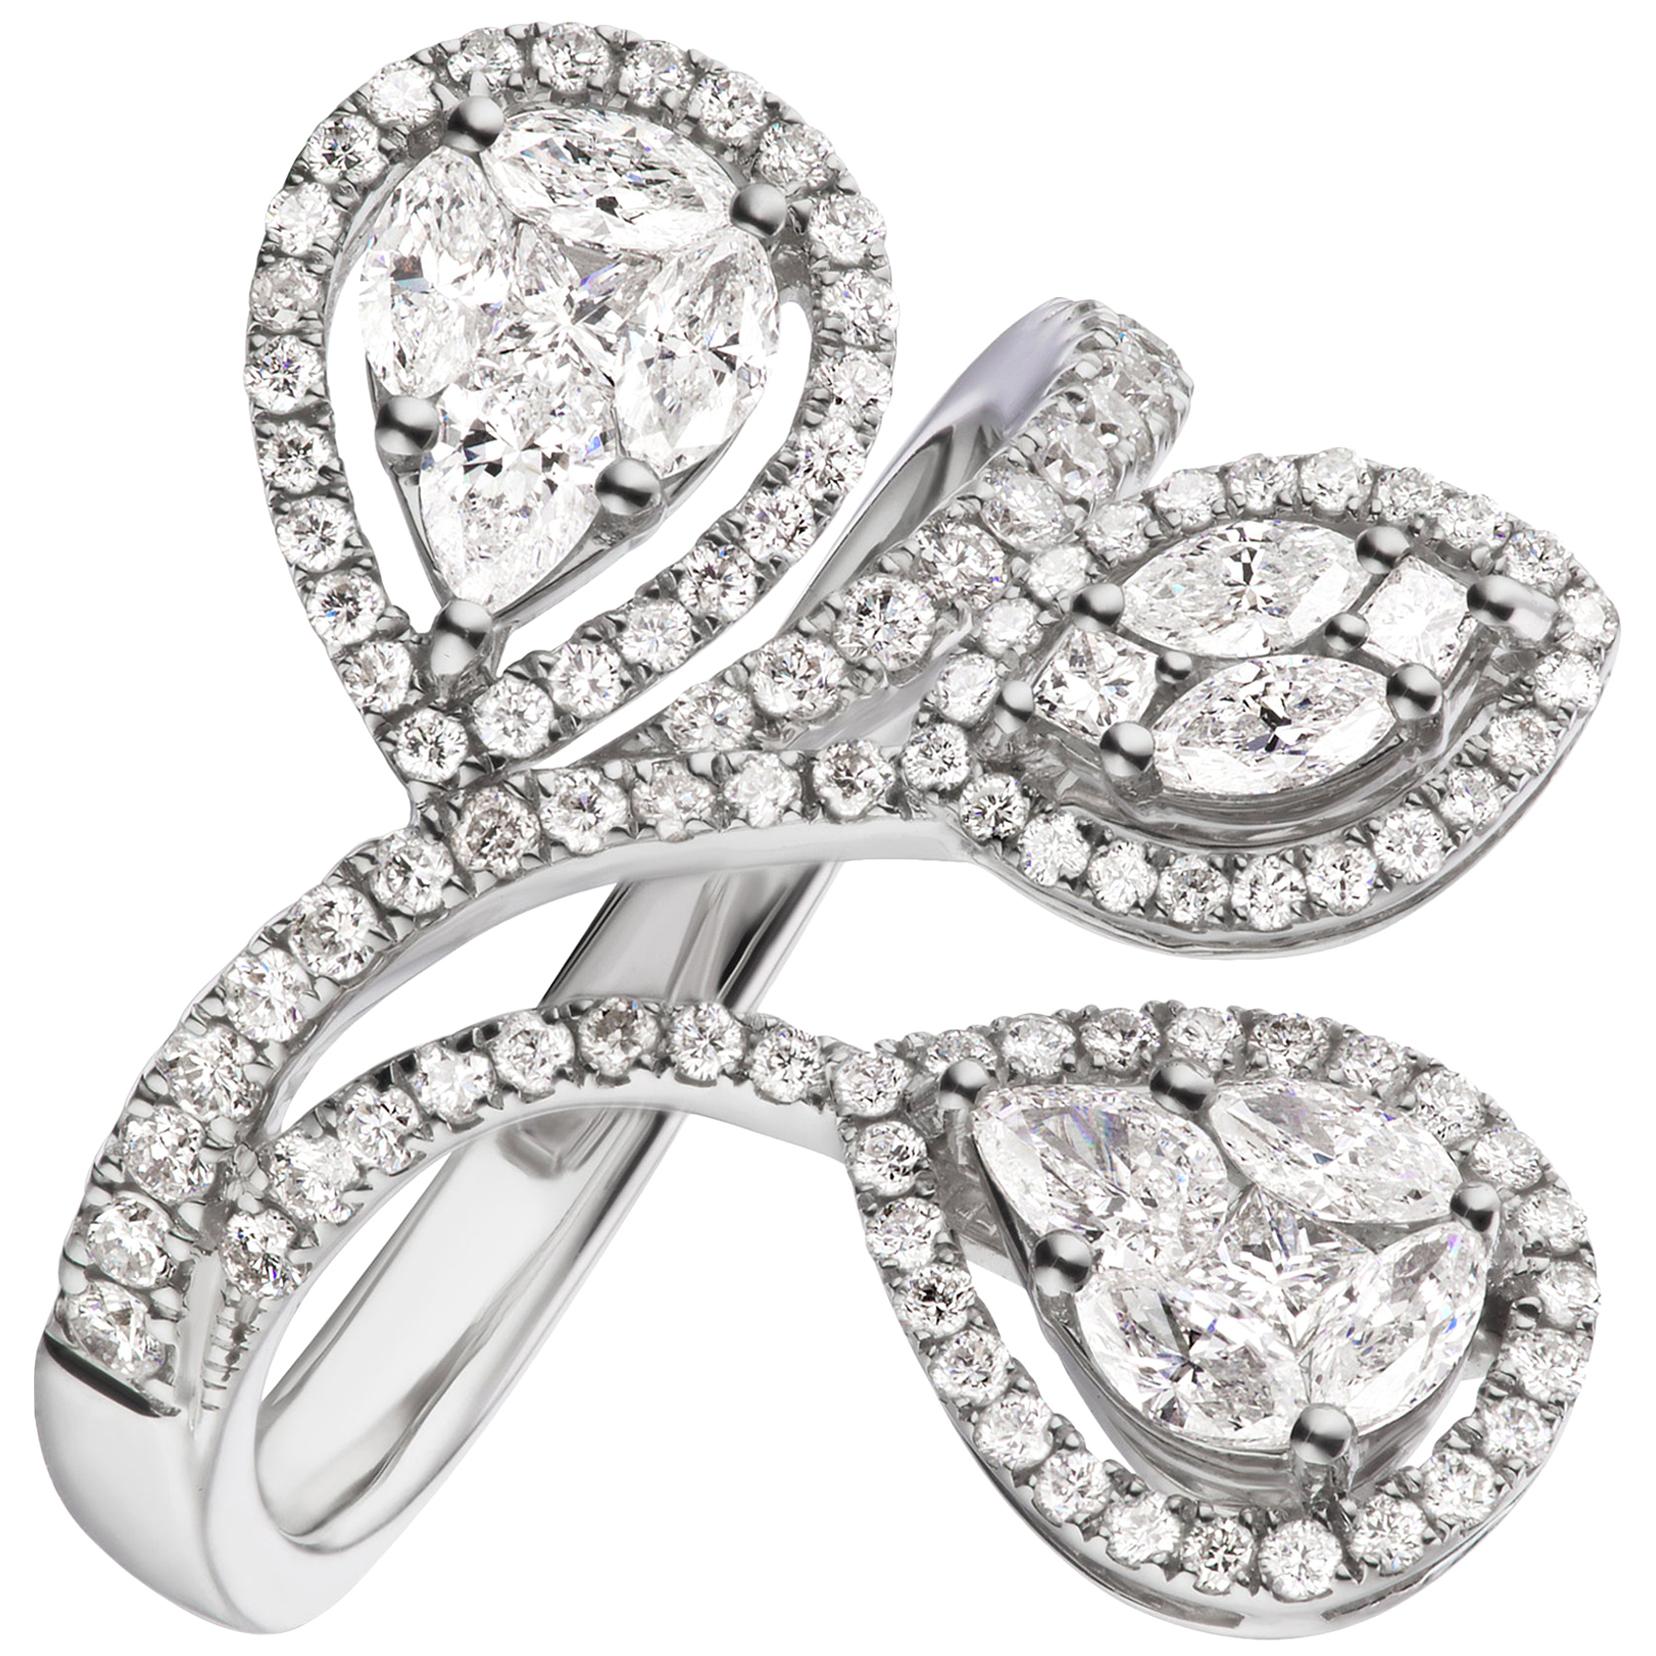 Ring in 18K White Gold with Diamond